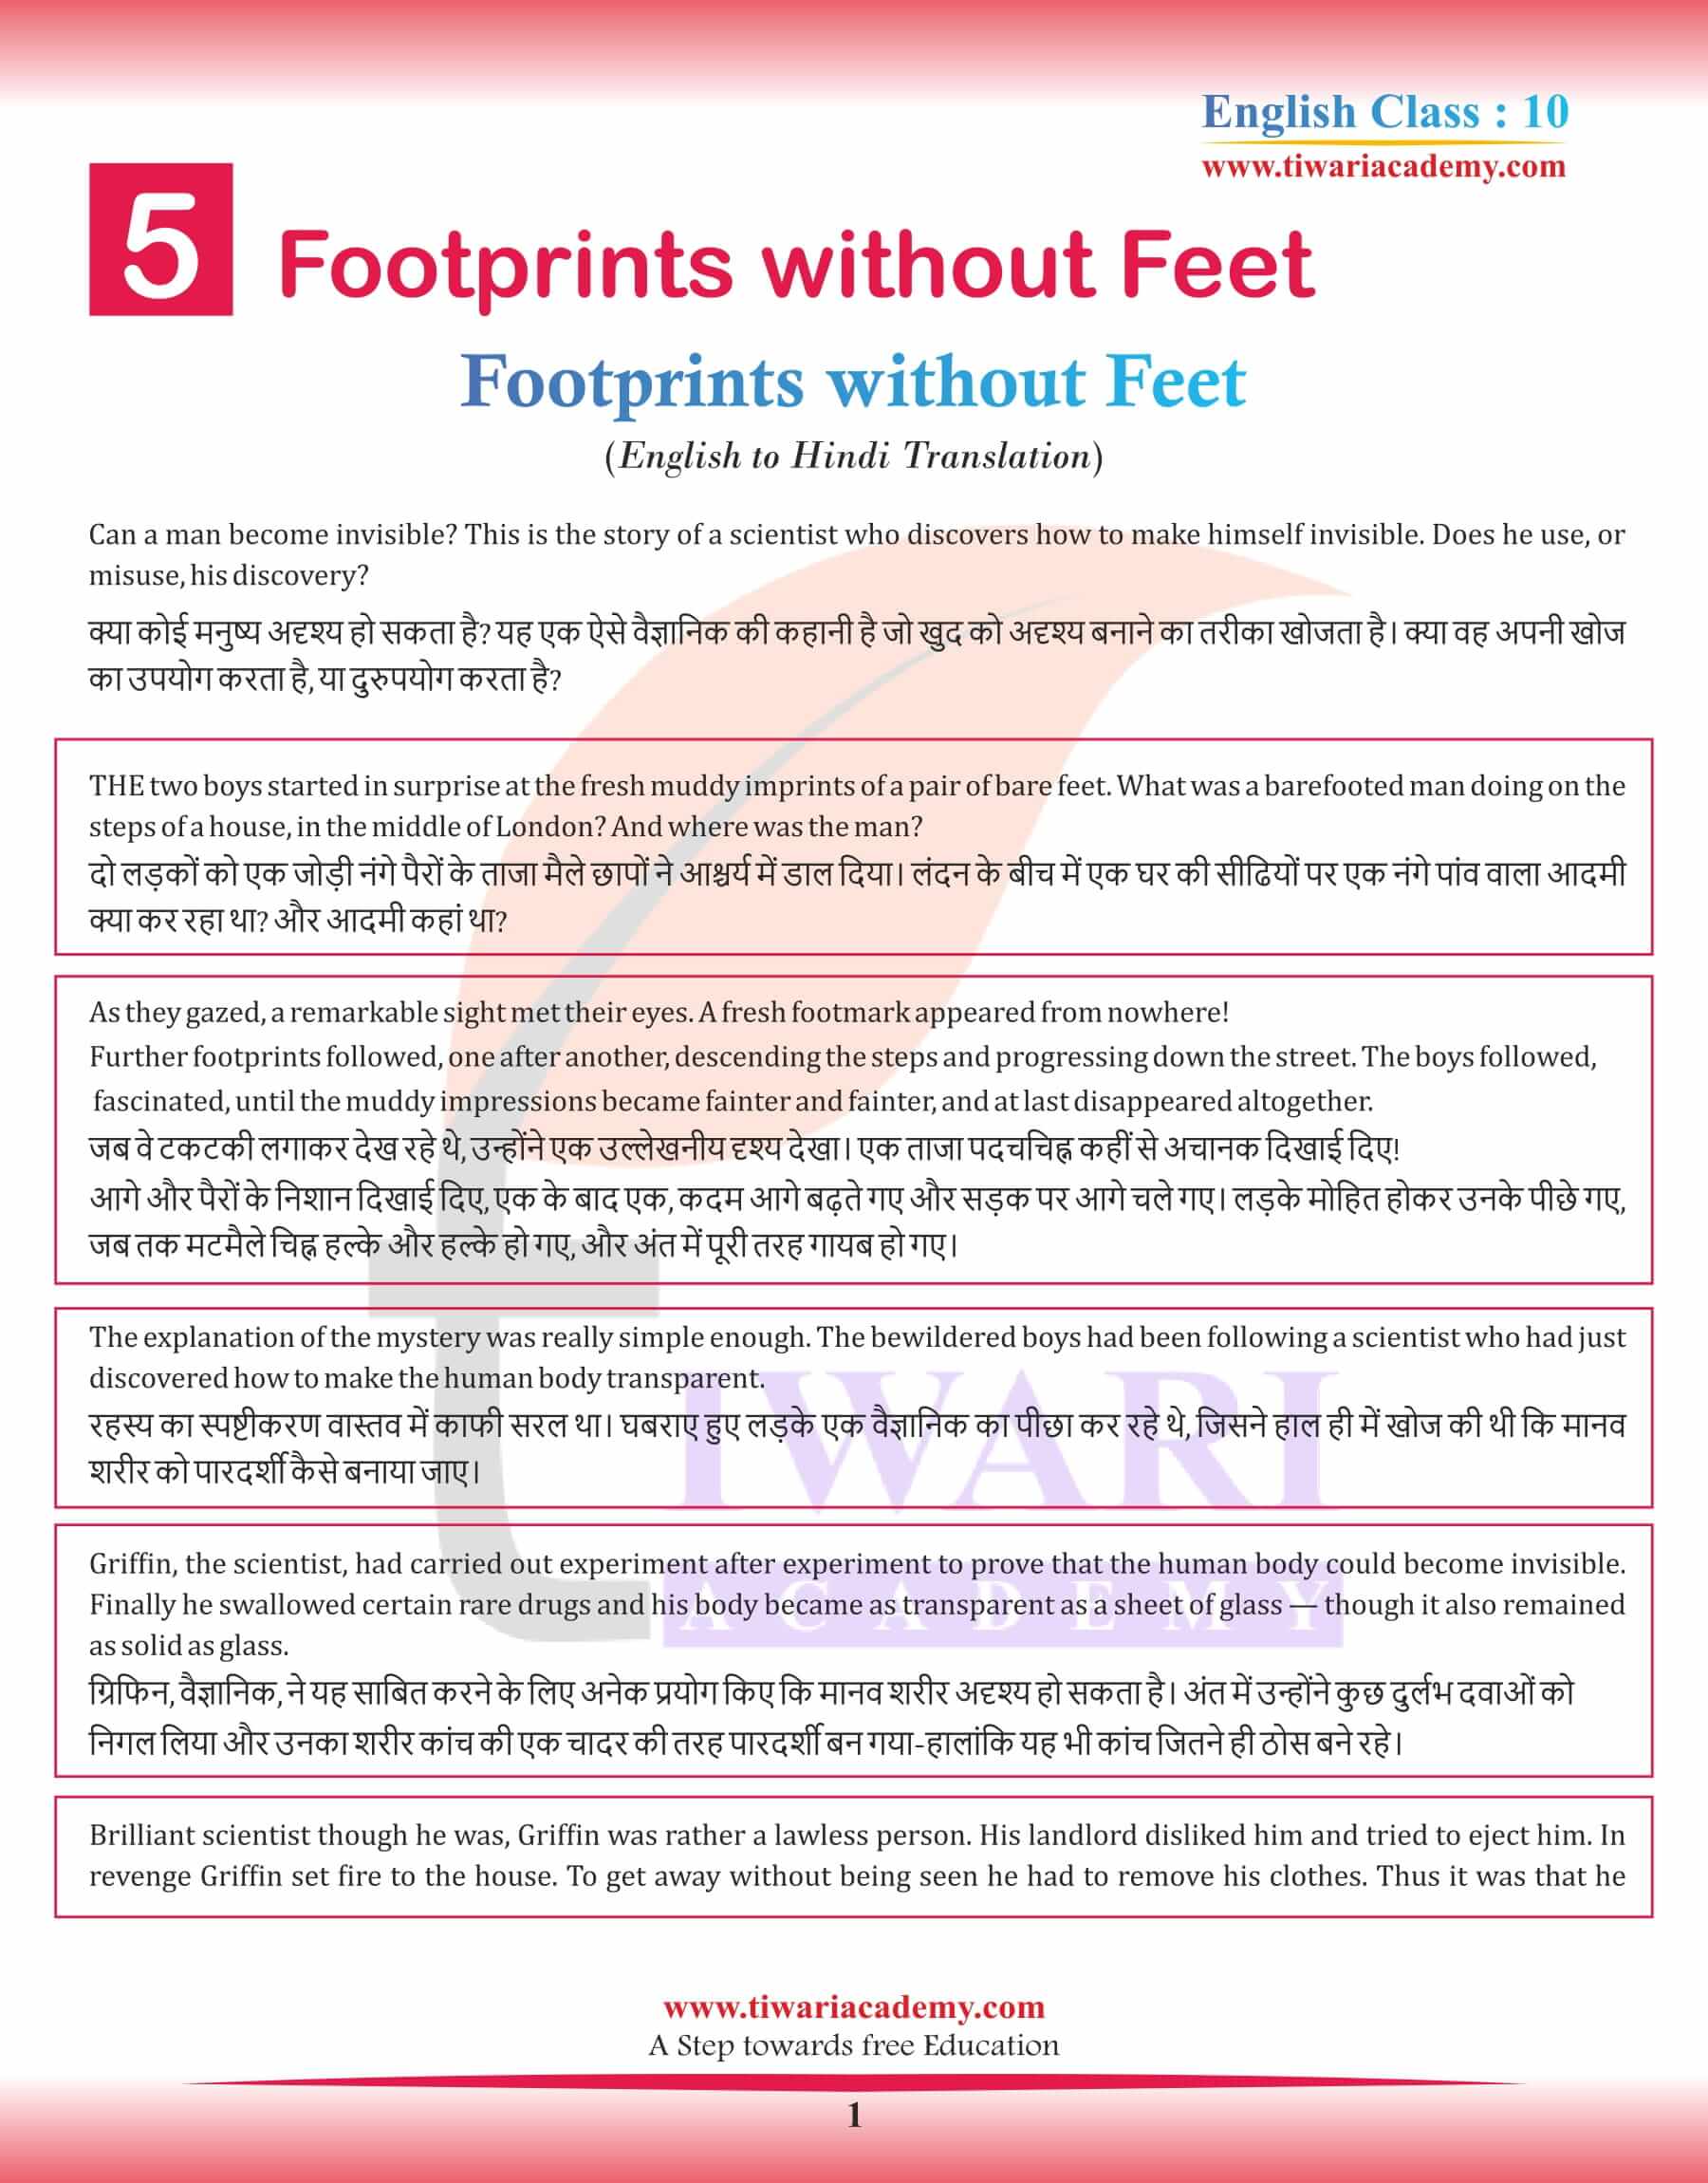 Class 10 English Supplementary Chapter 5 Footprints without Feet